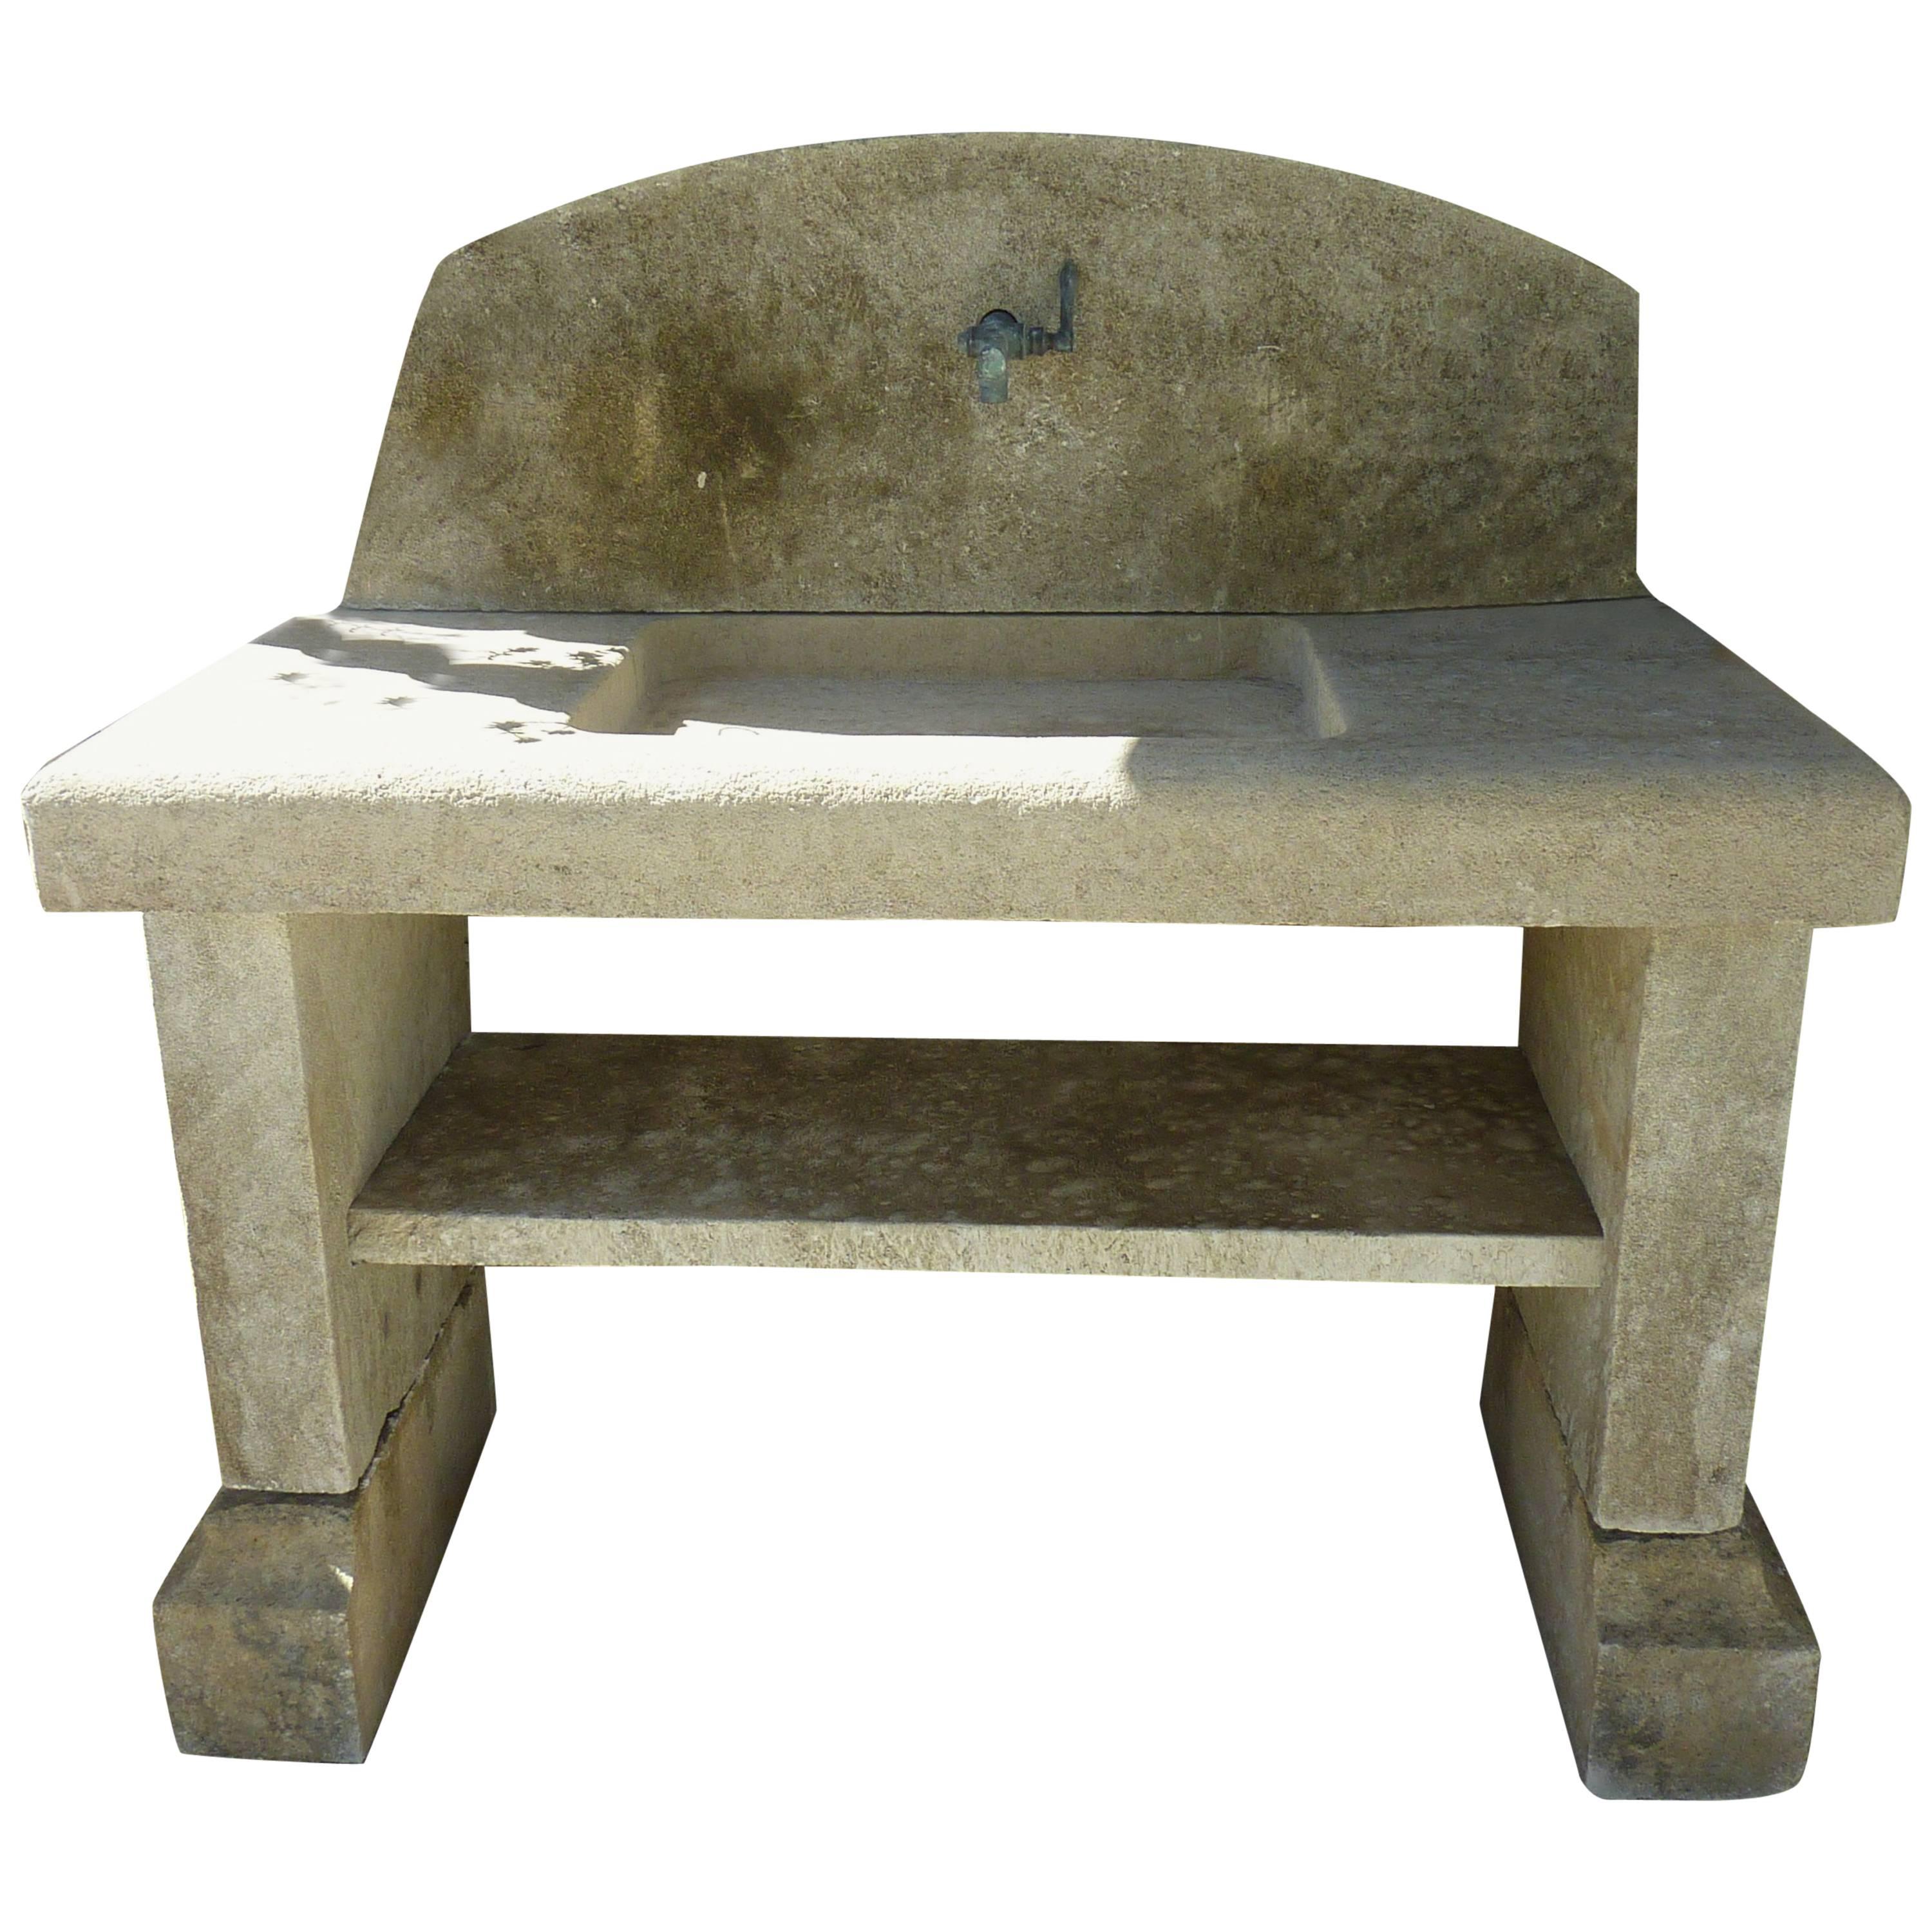 Stone Summer Kitchen with Sink, Pediment, Legs and Shelf For Sale